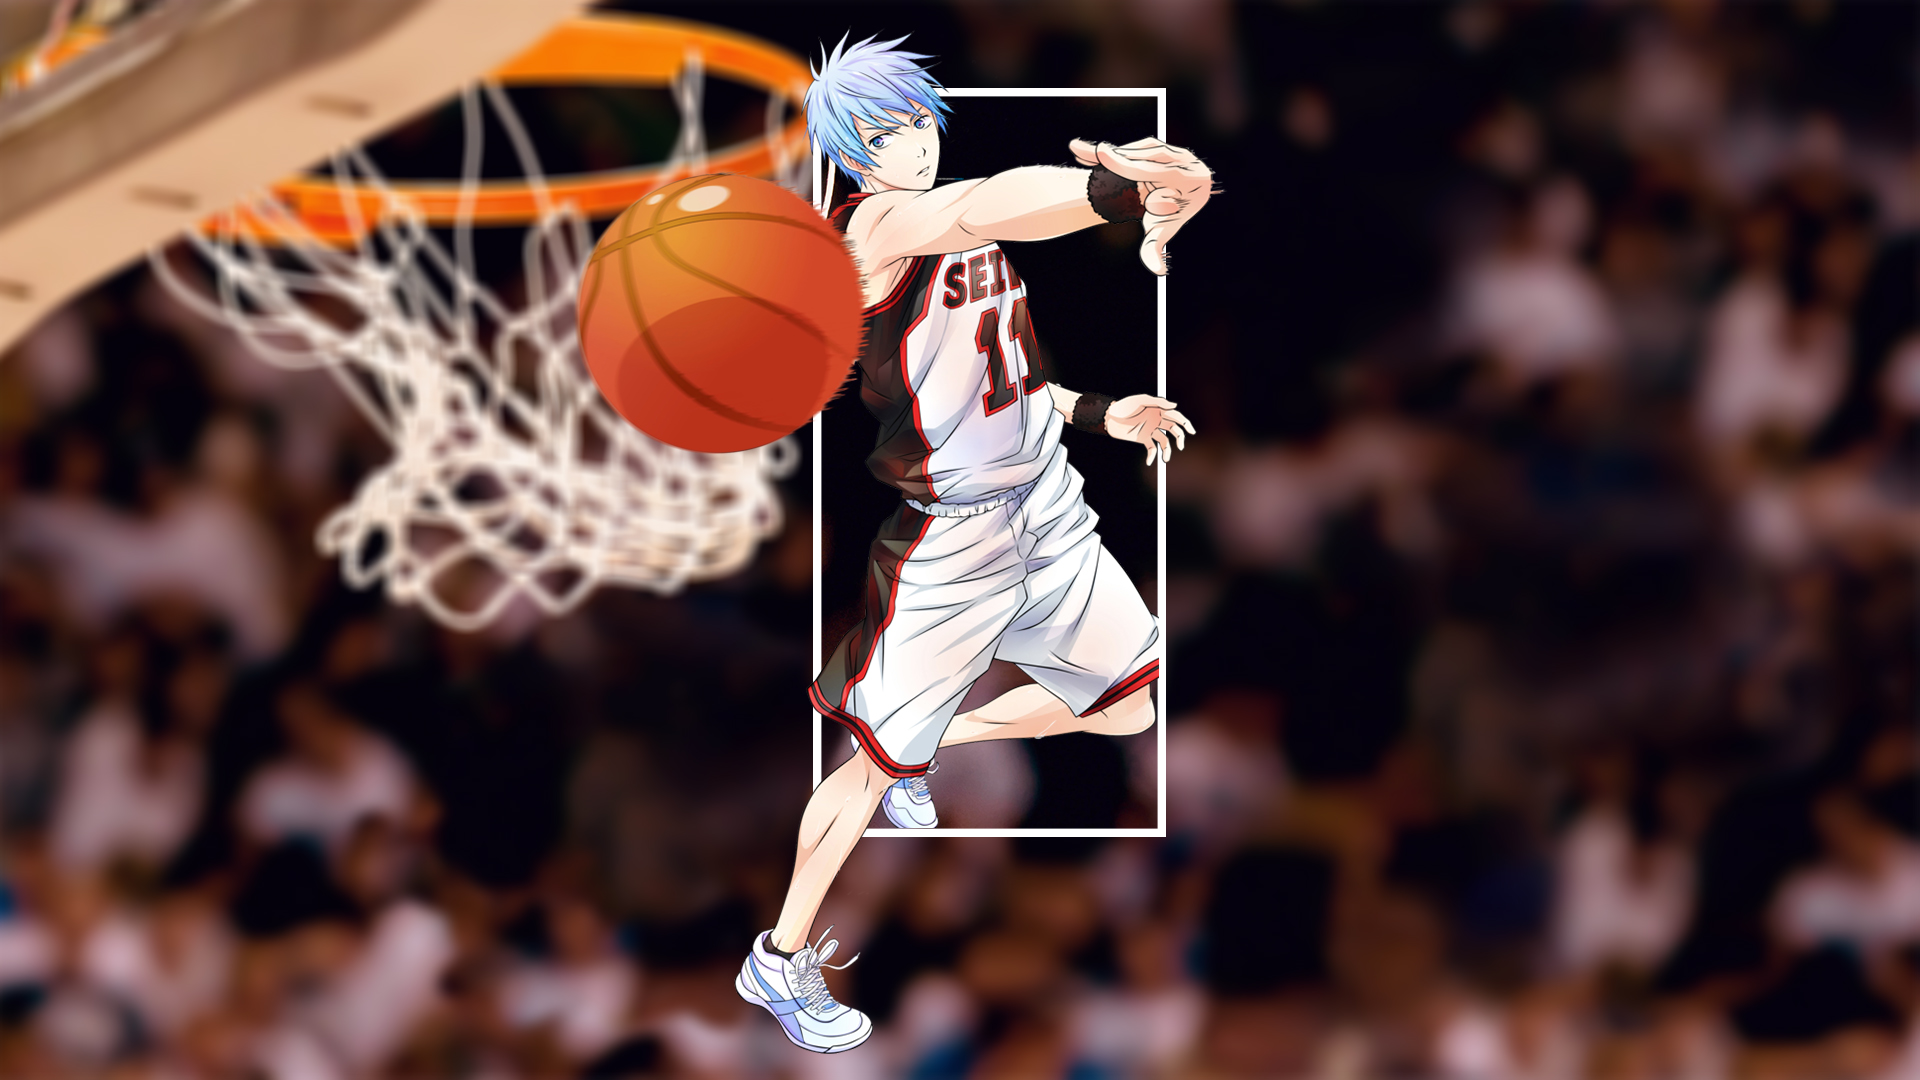 Anime 1920x1080 sport anime boys ball basketball blue hair anime picture-in-picture